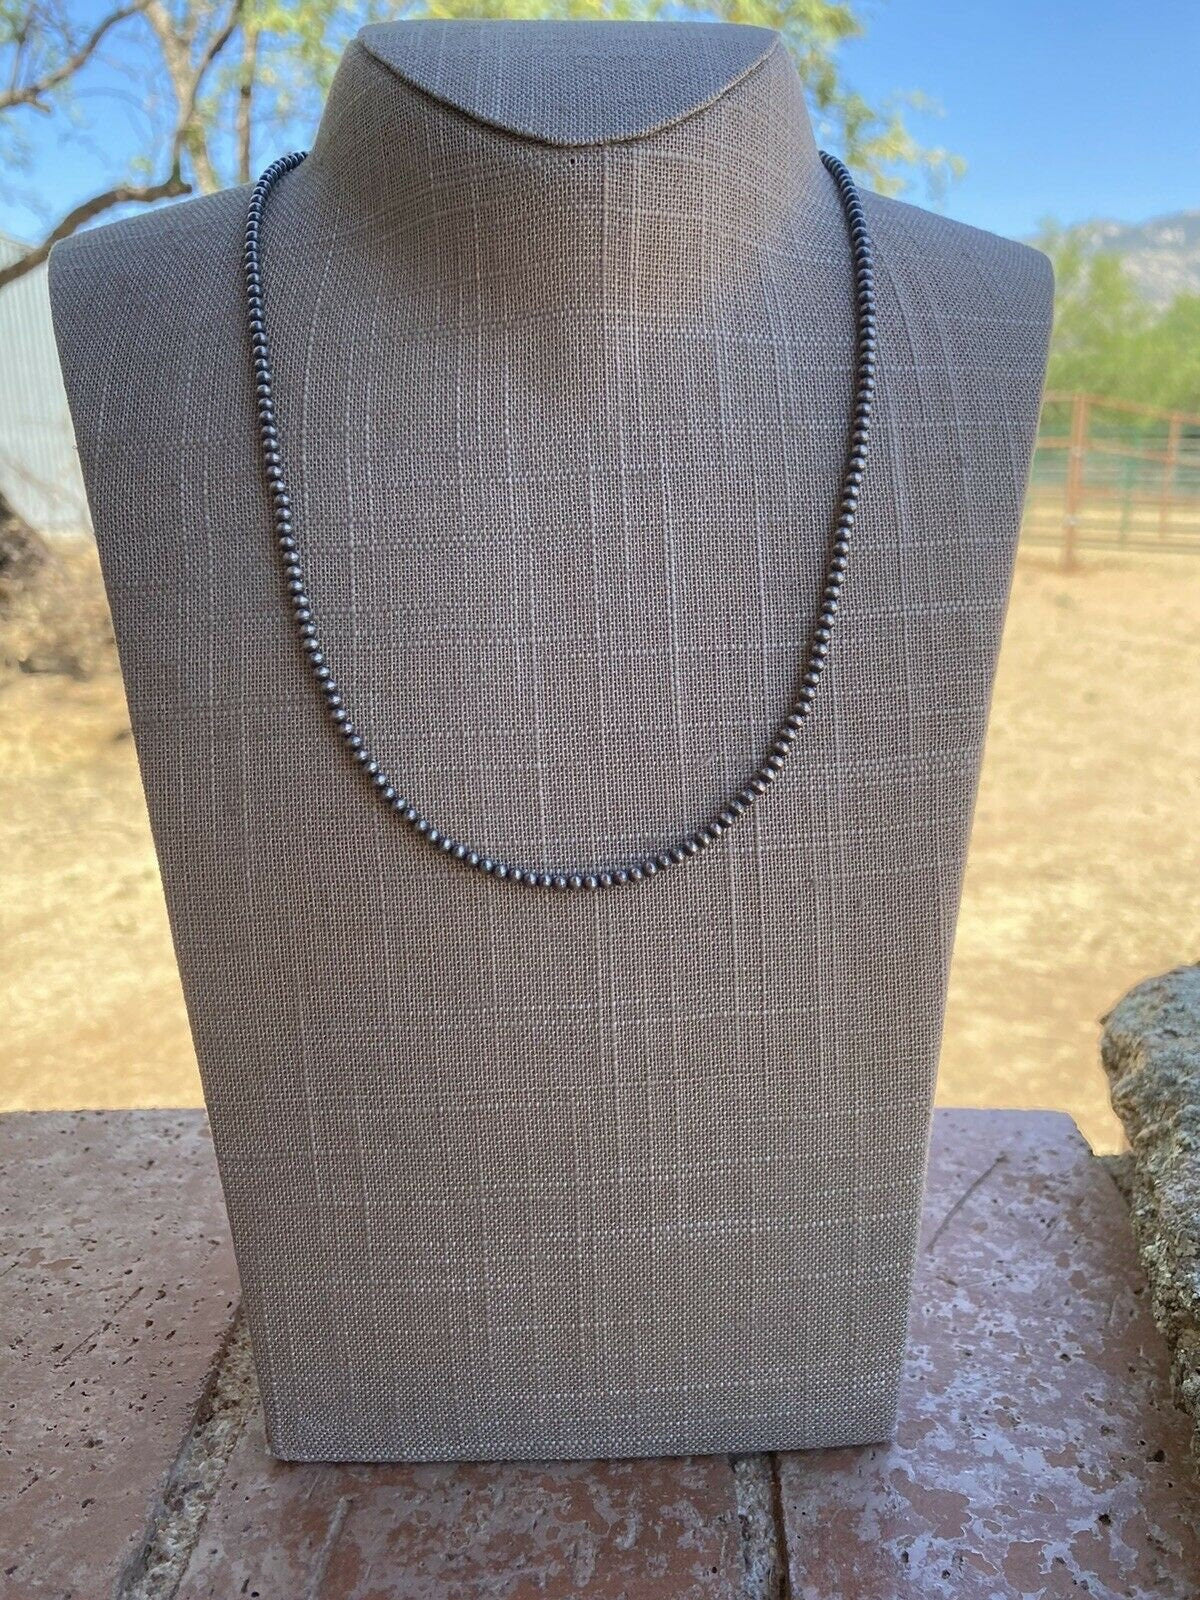 3mm Sterling Silver Navajo Pearl Style Beaded Necklace